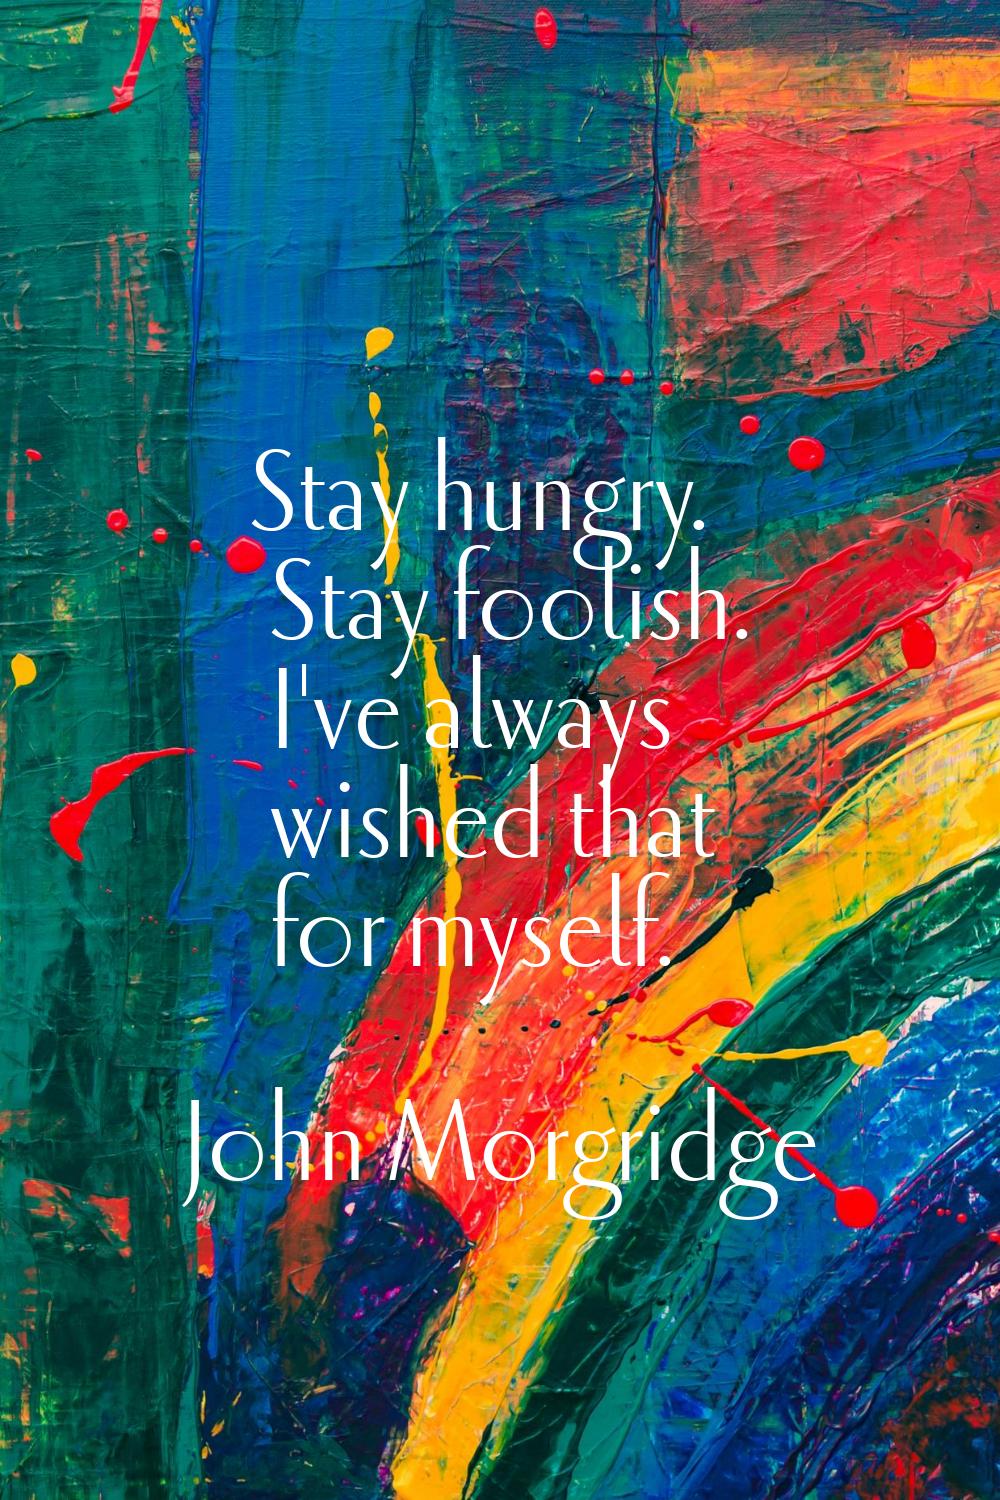 Stay hungry. Stay foolish. I've always wished that for myself.